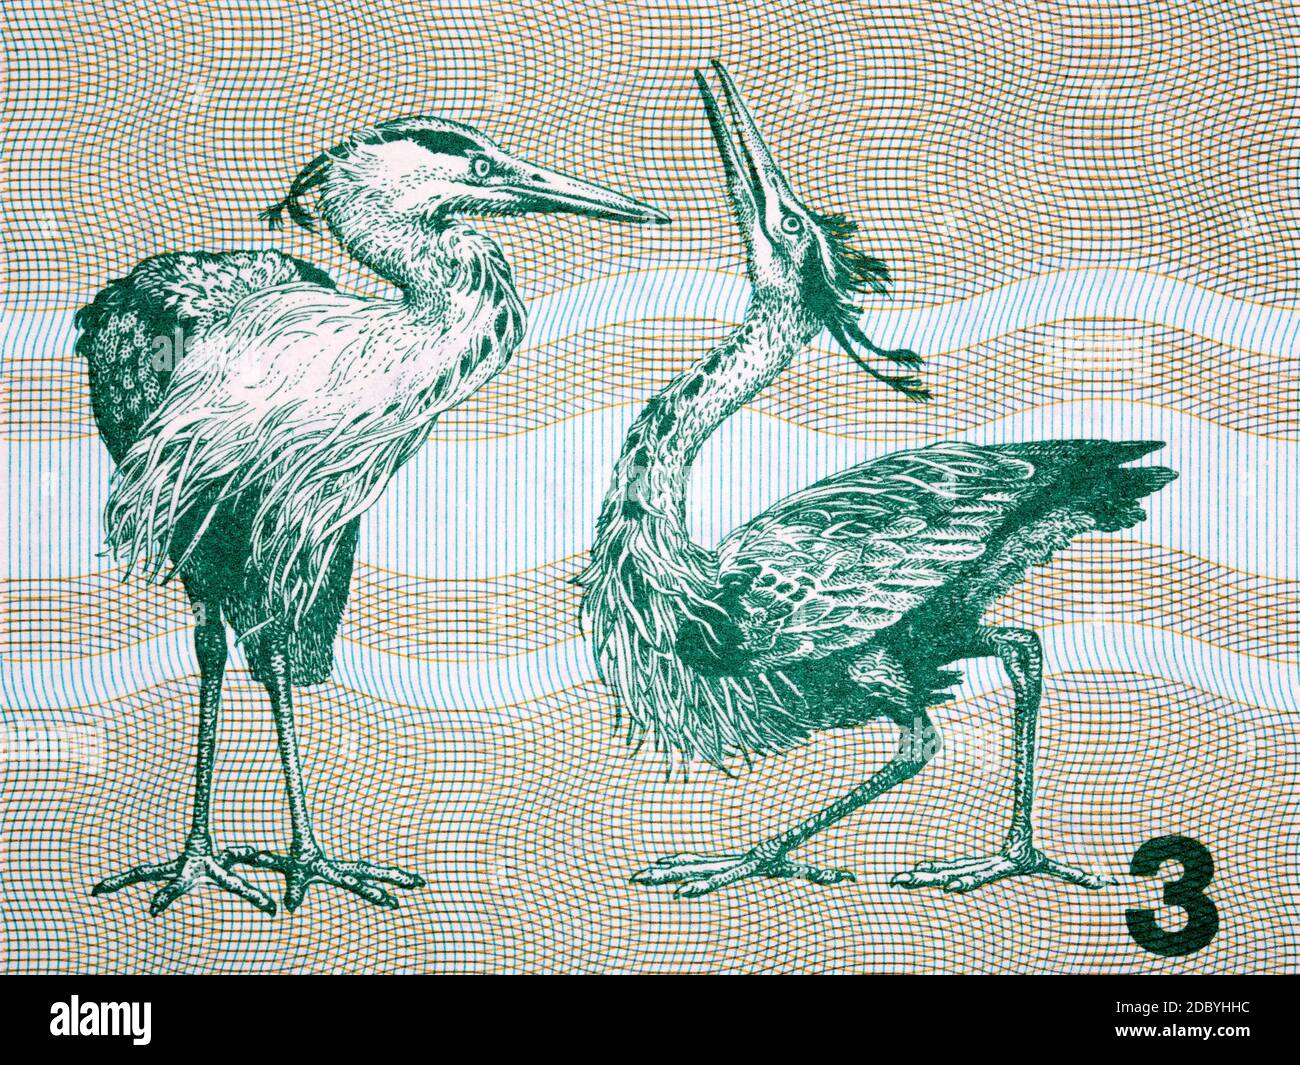 Gray herons a portrait from old Lithuanian money Stock Photo